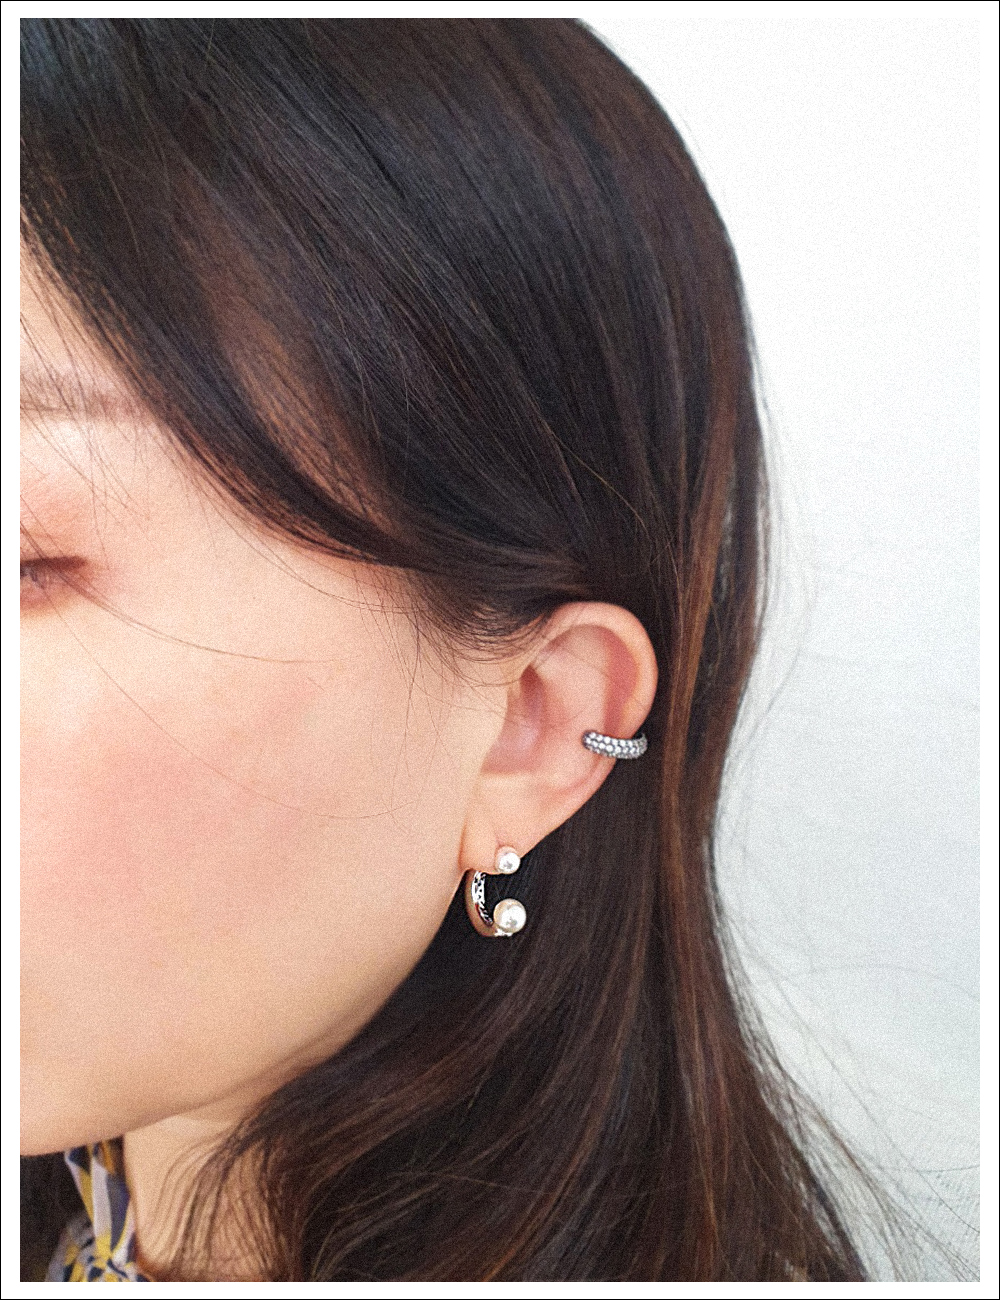 Daily two way silver pearl ring earring 데일리 투웨이 실버 진주 링귀걸이